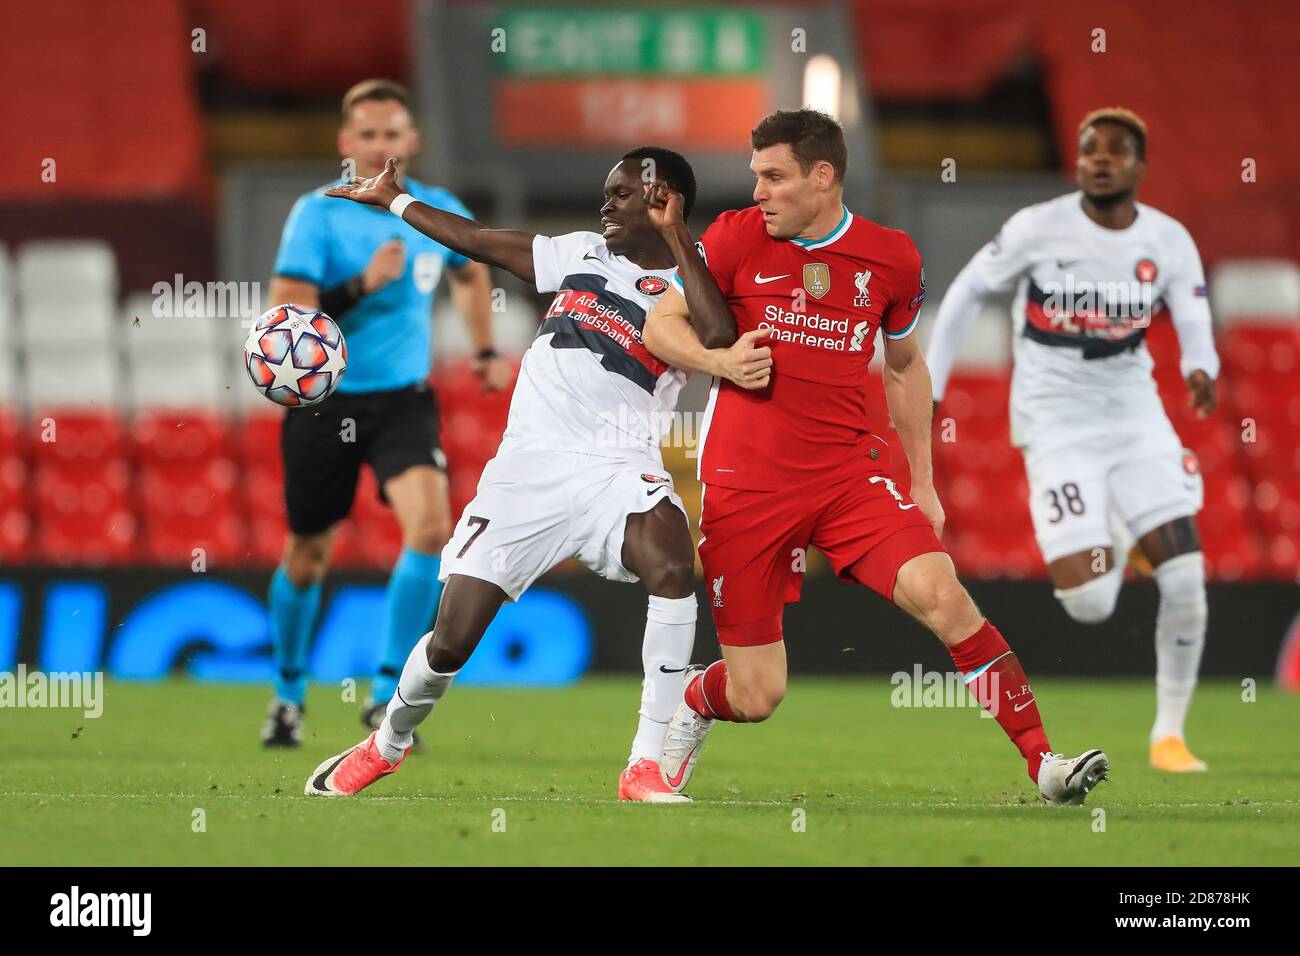 James Milner (7) of Liverpool fouls Pione Sisto (7) of FC Midtjylland Credit: News Images /Alamy Live News Stock Photo